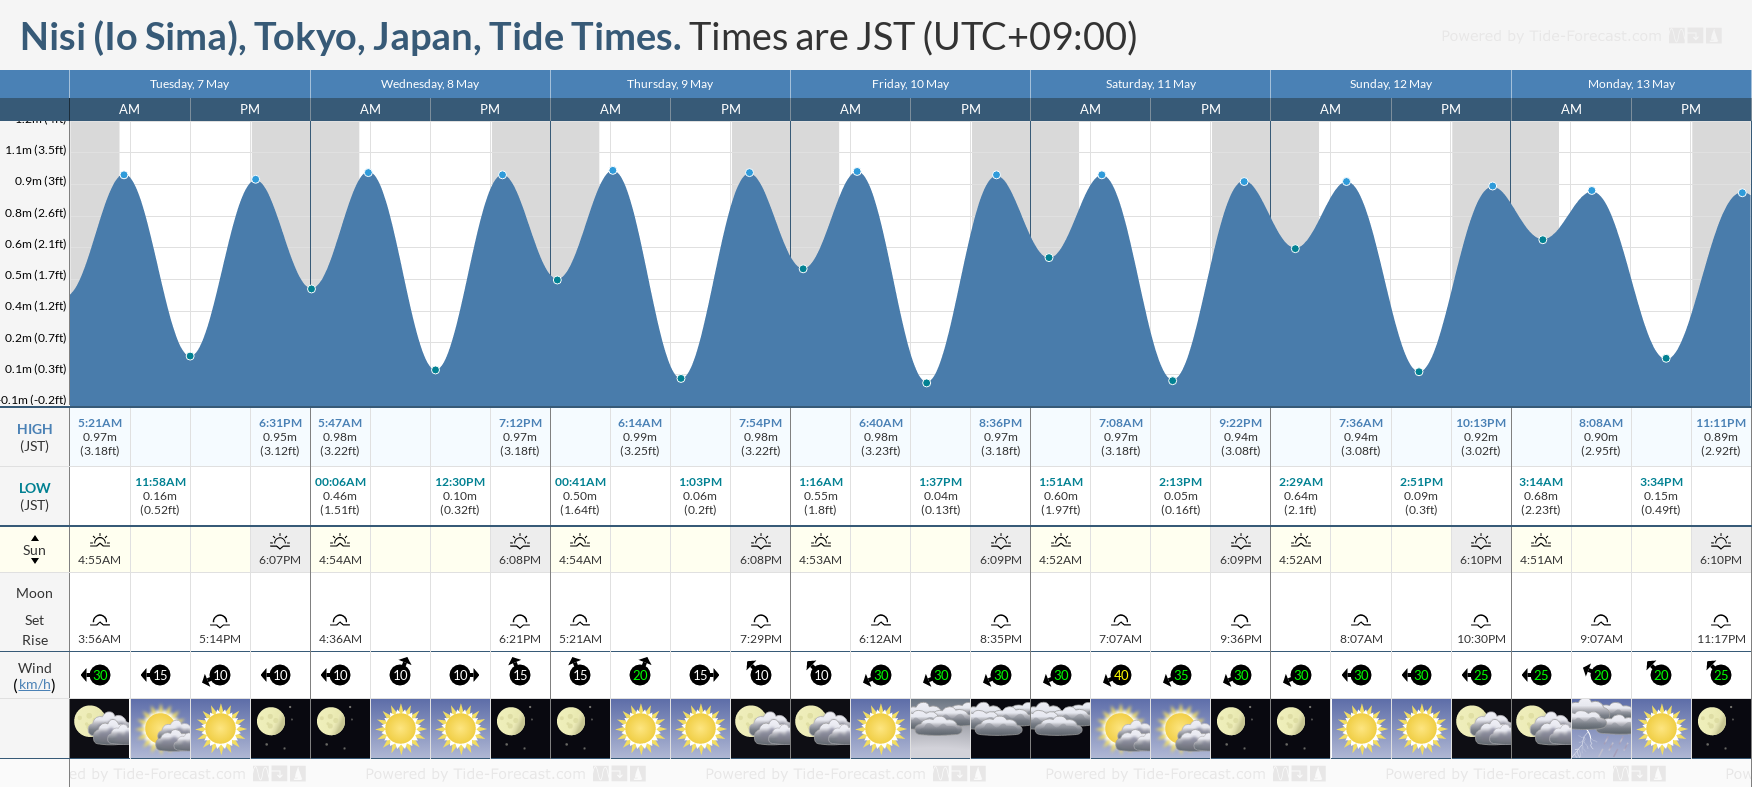 Nisi (Io Sima), Tokyo, Japan Tide Chart including high and low tide tide times for the next 7 days